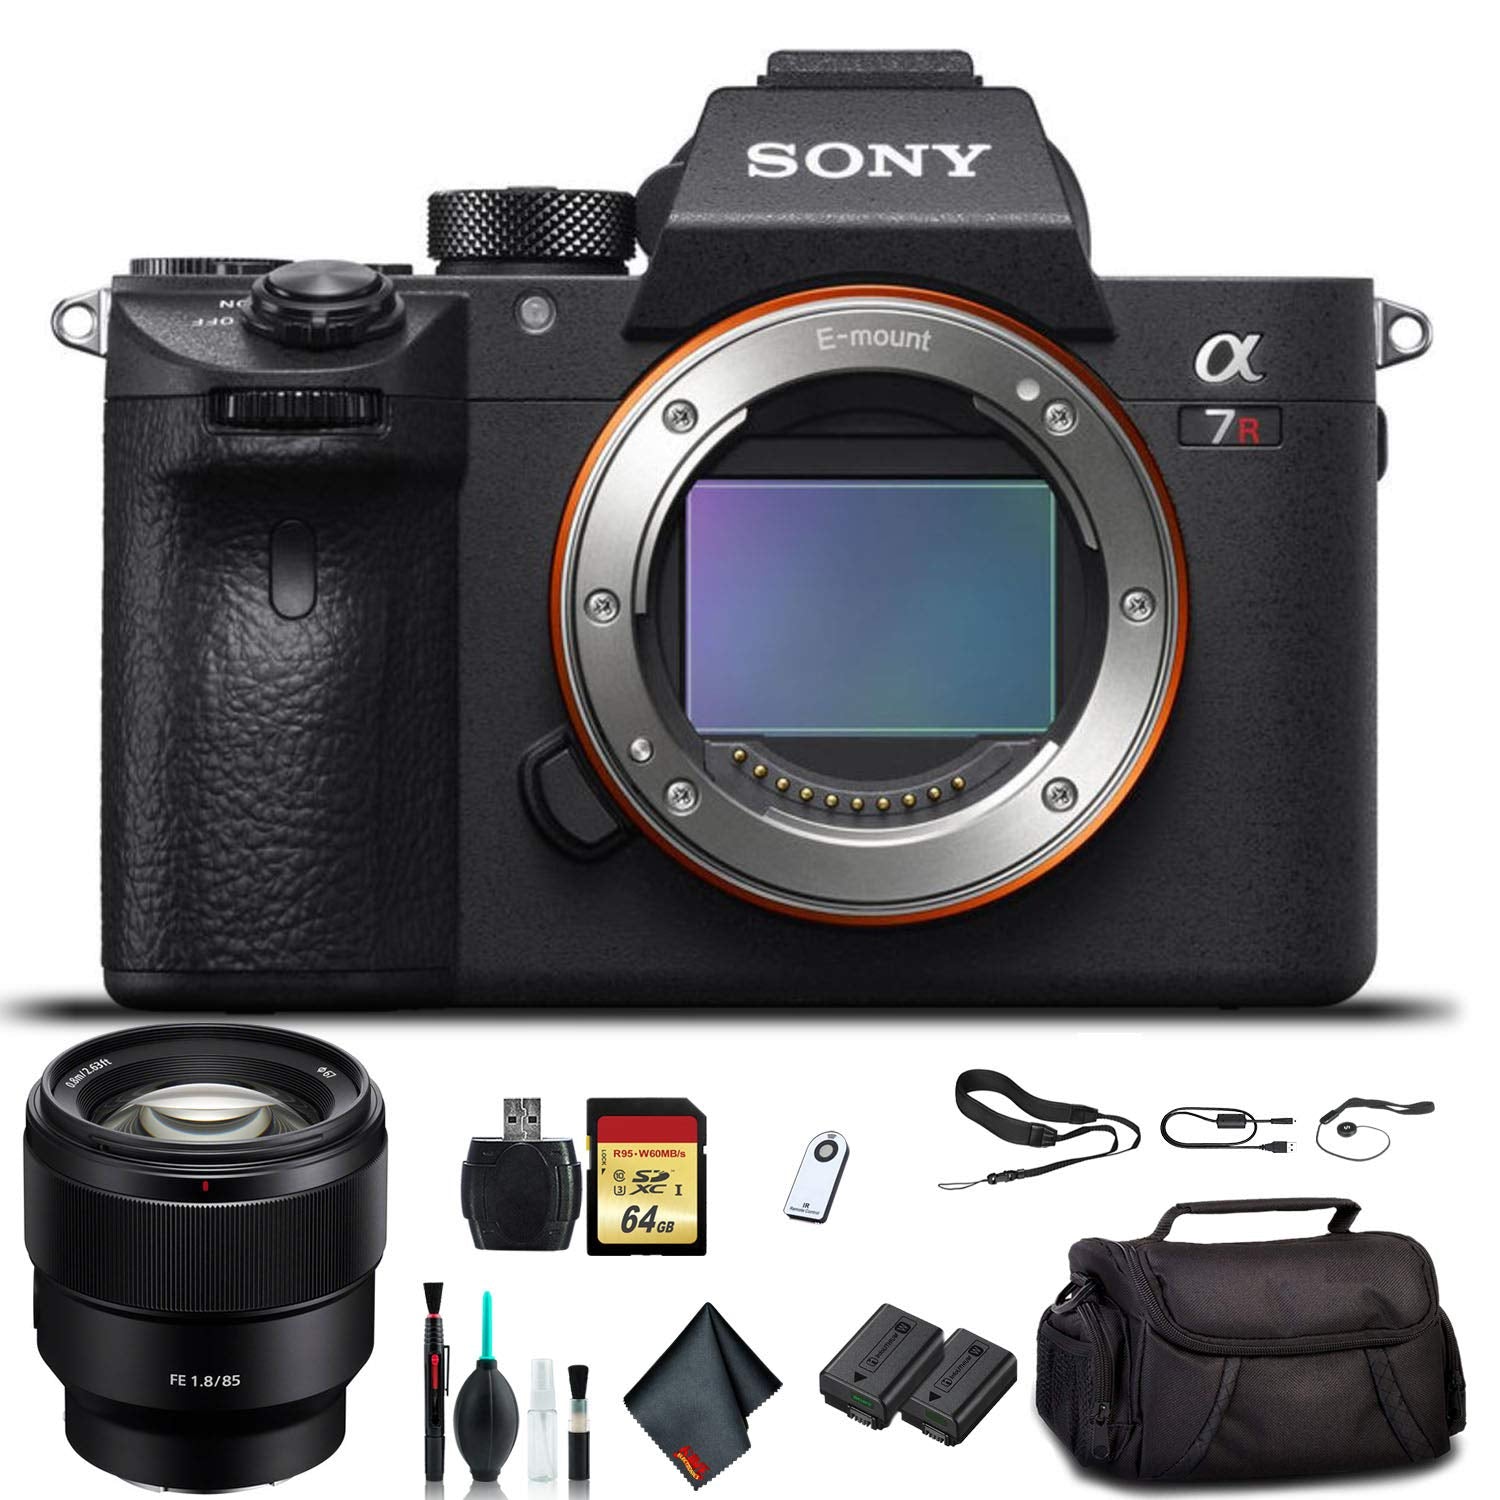 Sony Alpha a7R III Mirrorless Camera ILCE7RM3/B With Sony FE 24-70mm Lens, Soft Bag, Additional Battery, 64GB Memory Card, Card Reader , Plus Essential Accessories